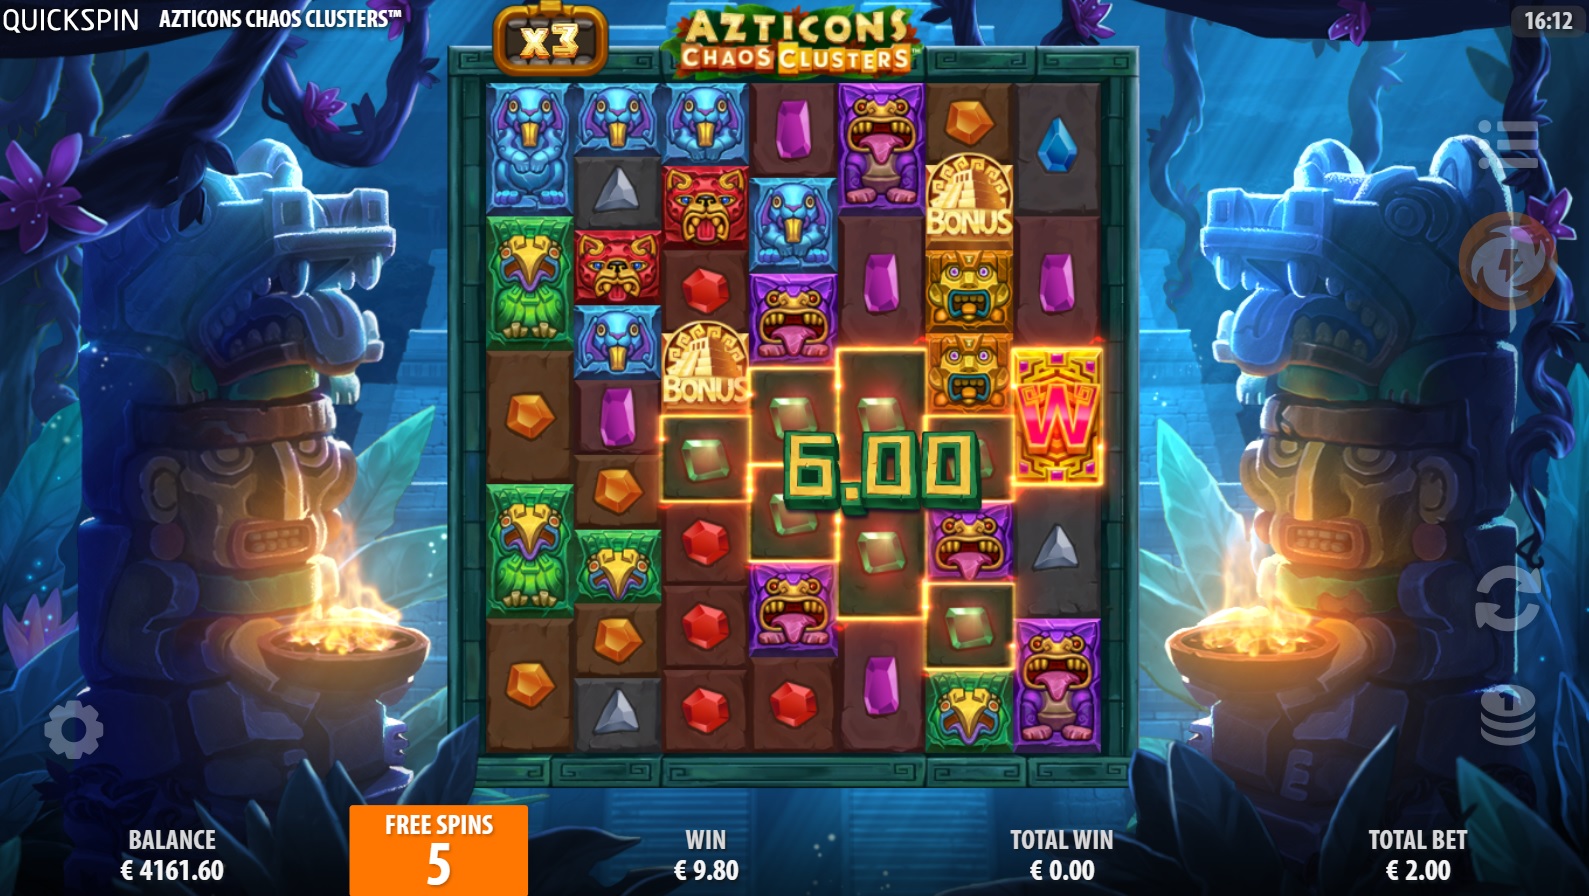 Azticons Chaos Clusters, Free spins feature